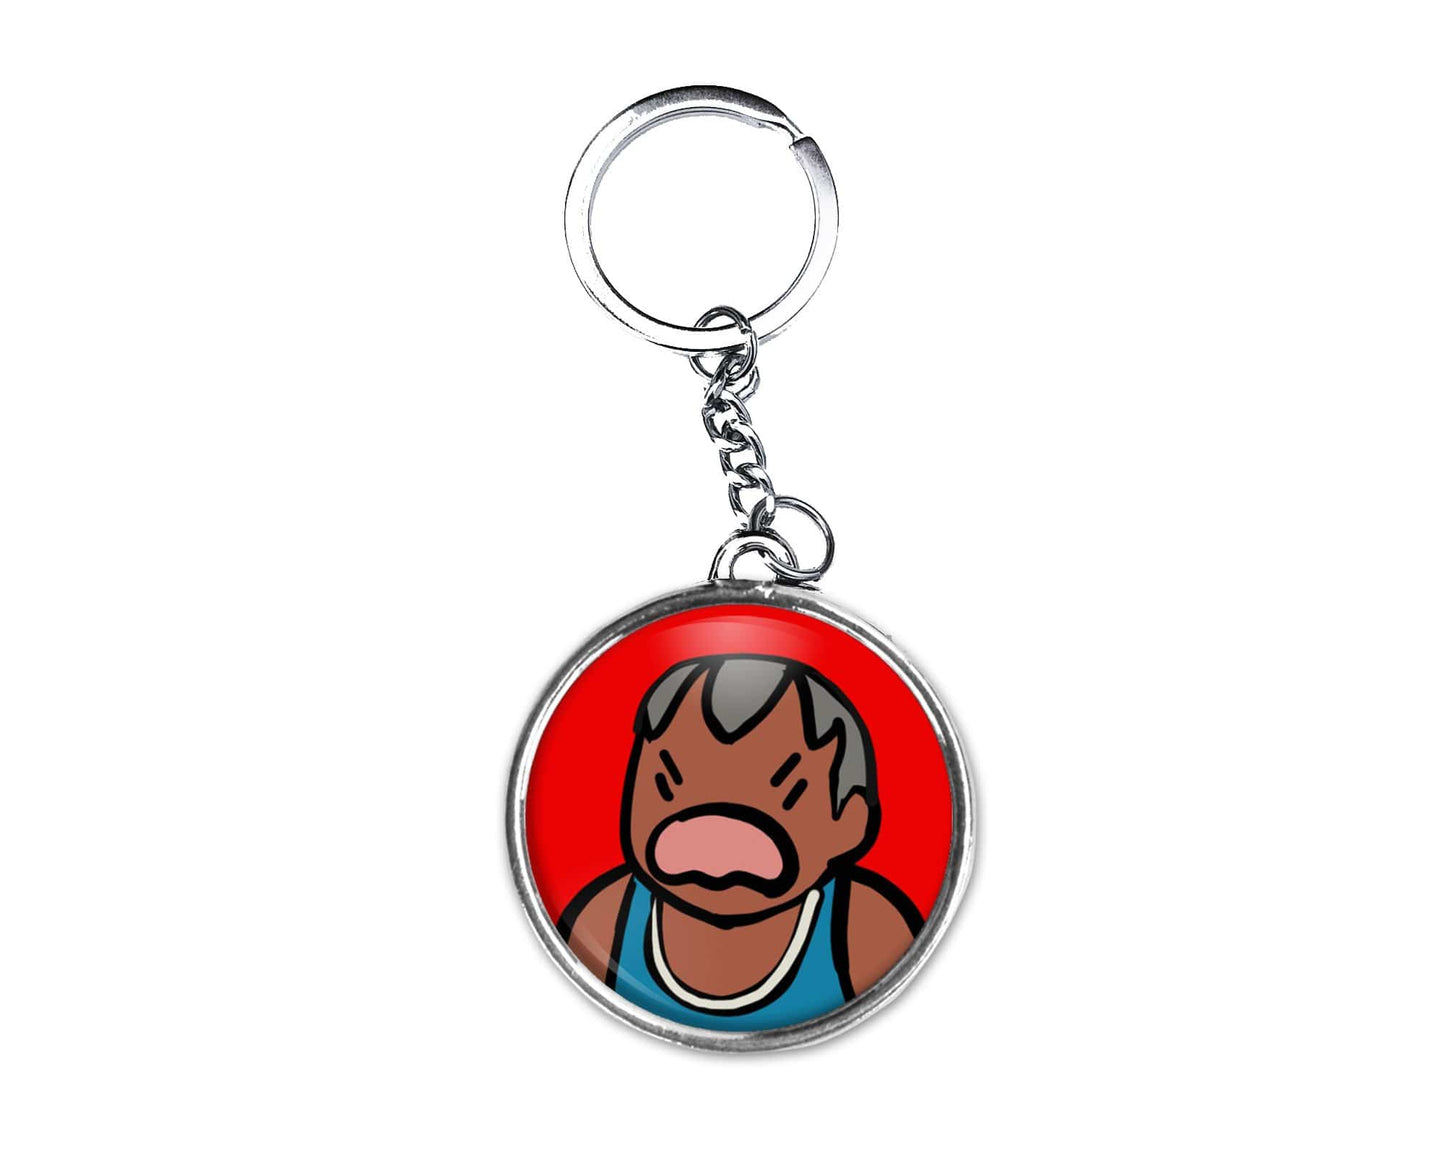 Balrog Angry Button Keychain